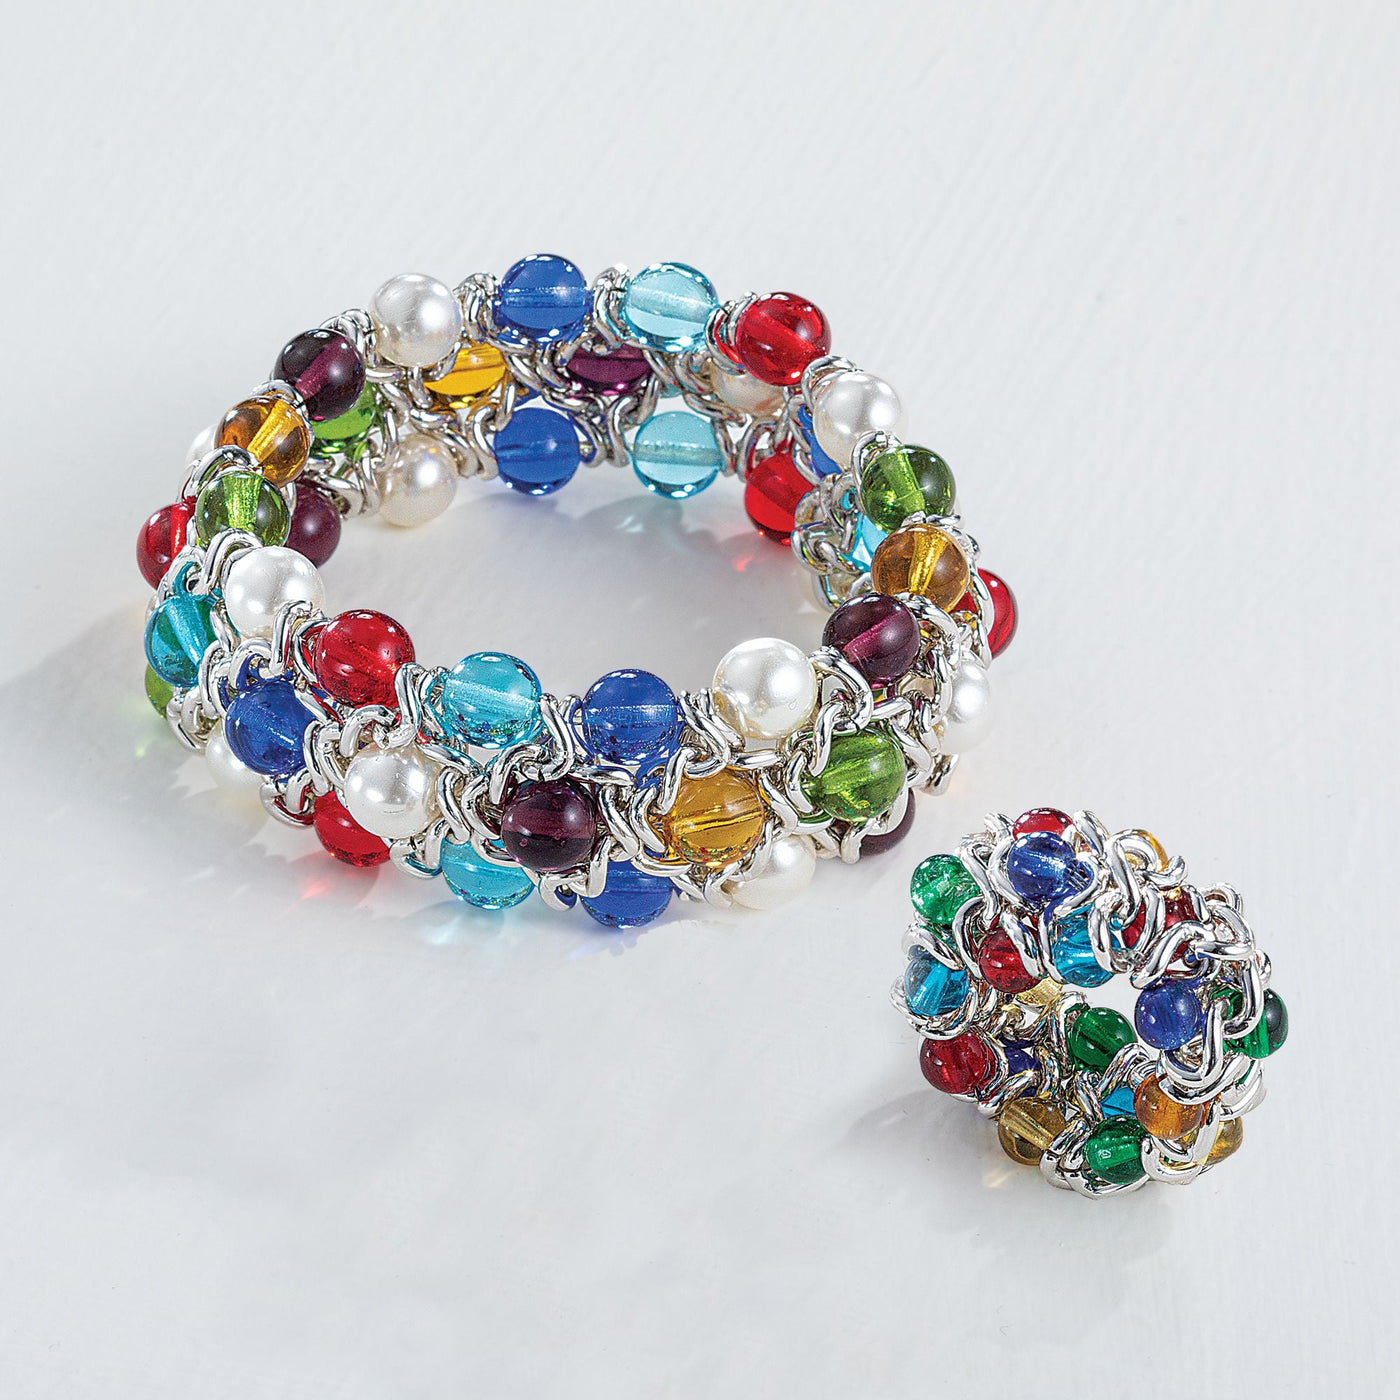 Murano Glass Colorful Orbs Ring